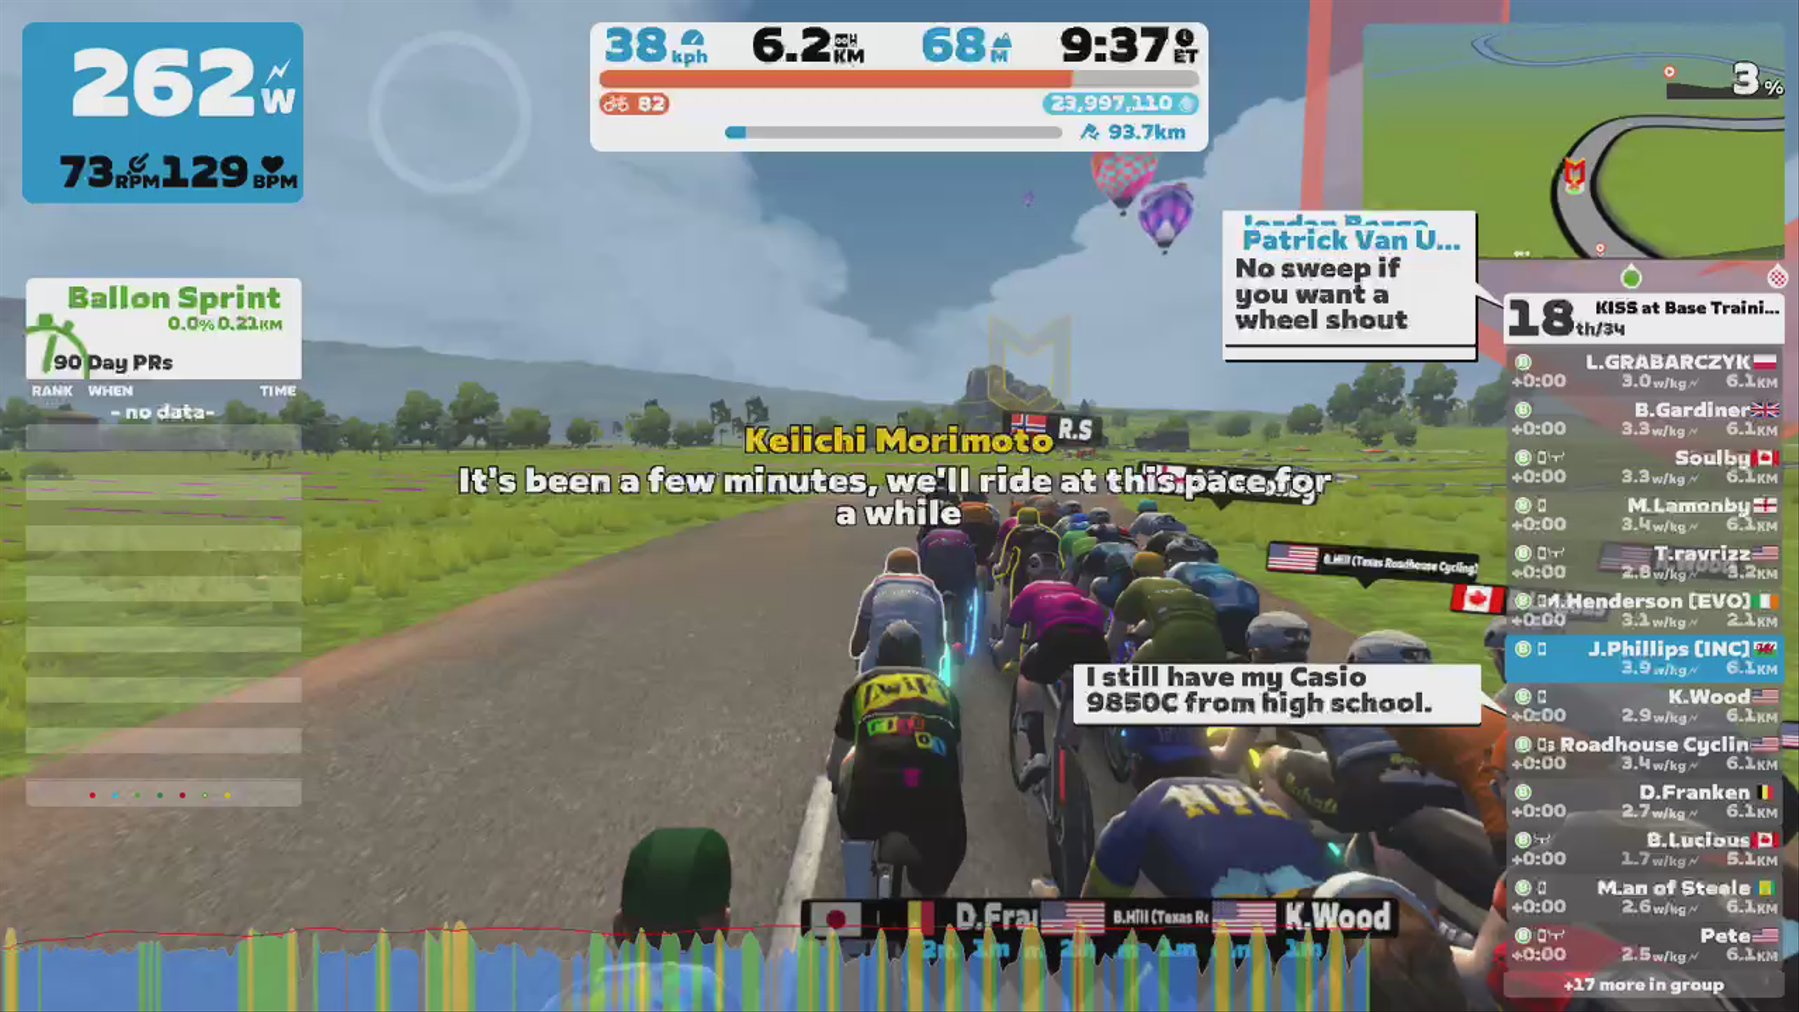 Zwift - Group Ride: KISS at Base Training Ride (B) on Douce France in France